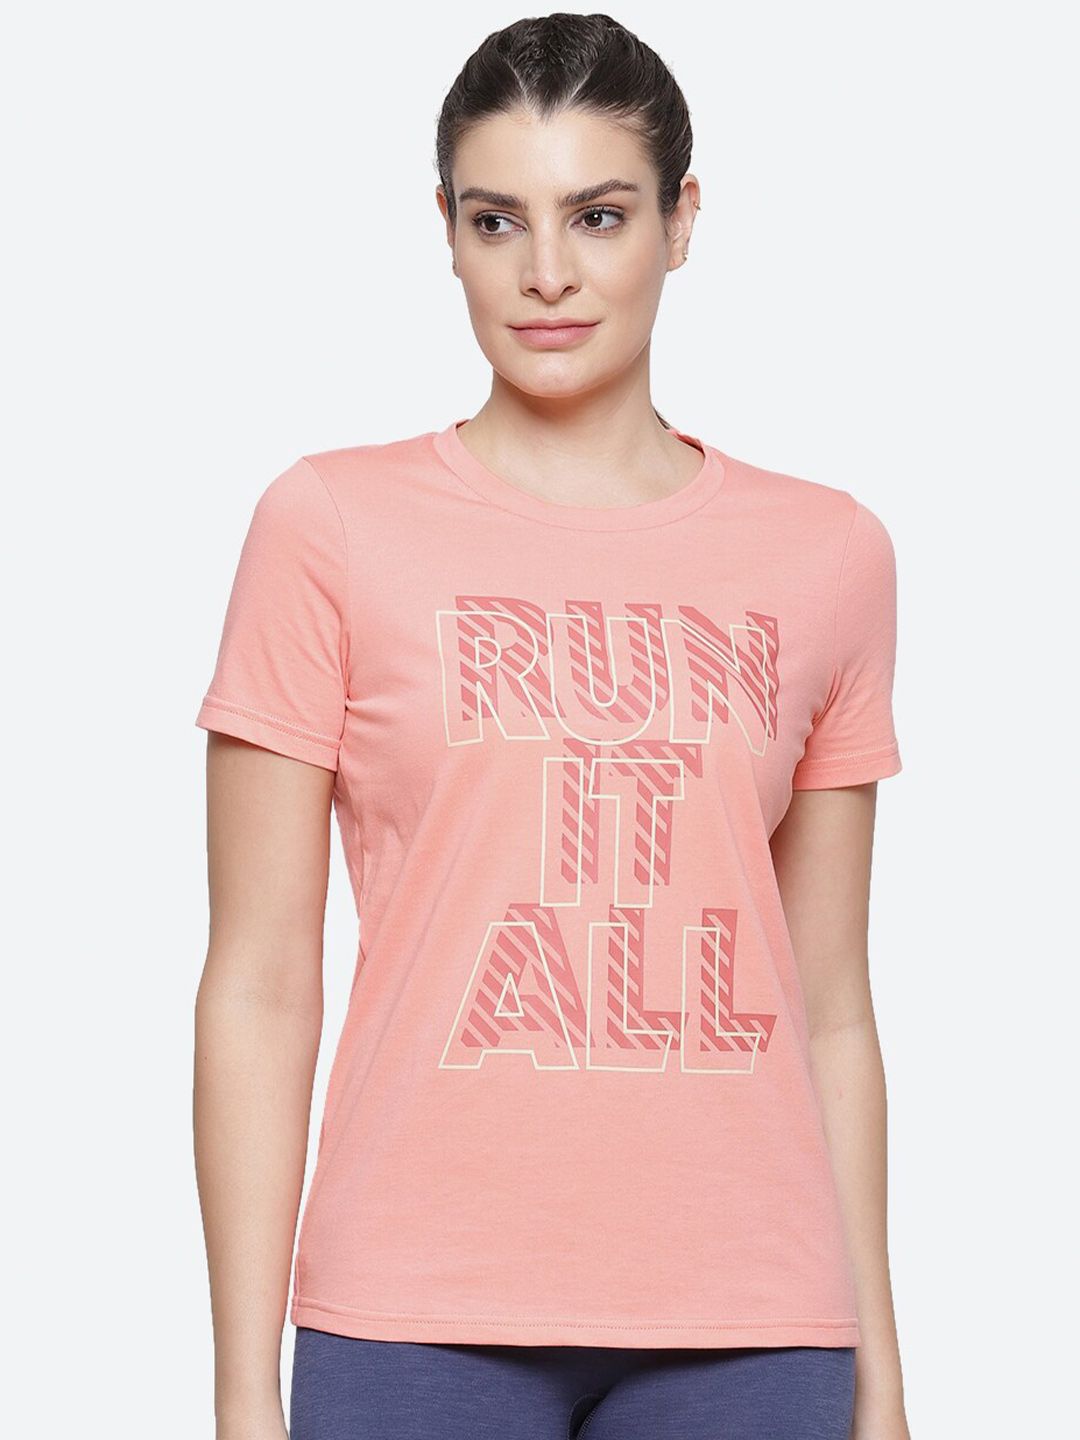 ASICS Women Pink & Off White Typography Printed W HERITAGE FONT GRAPHIC 1 Gym T-shirt Price in India